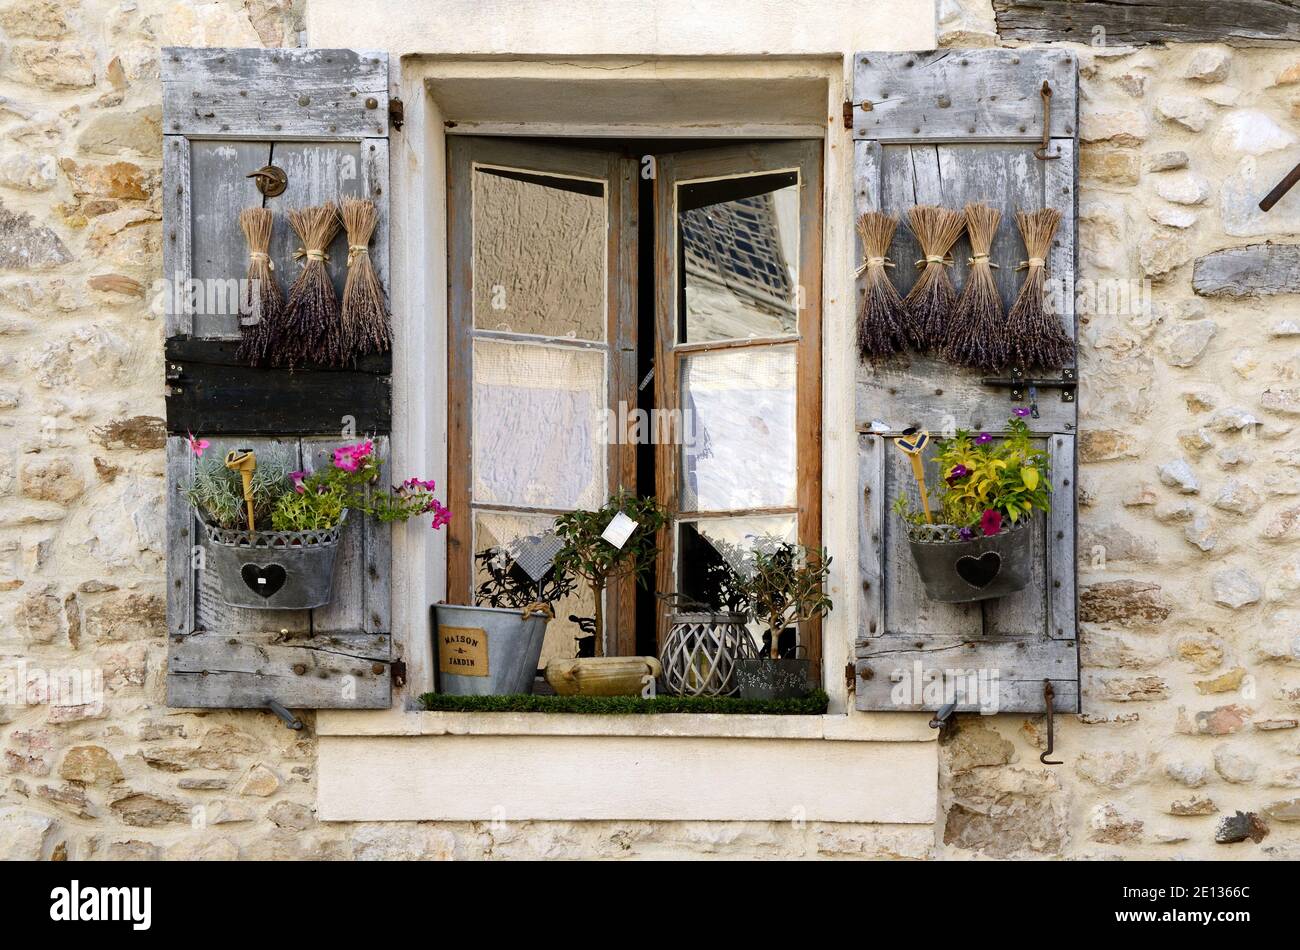 Decorated Window & Shutters Embelished with Clumps of Lavender & Window Planters at Le Castellet Var Provence France Stock Photo